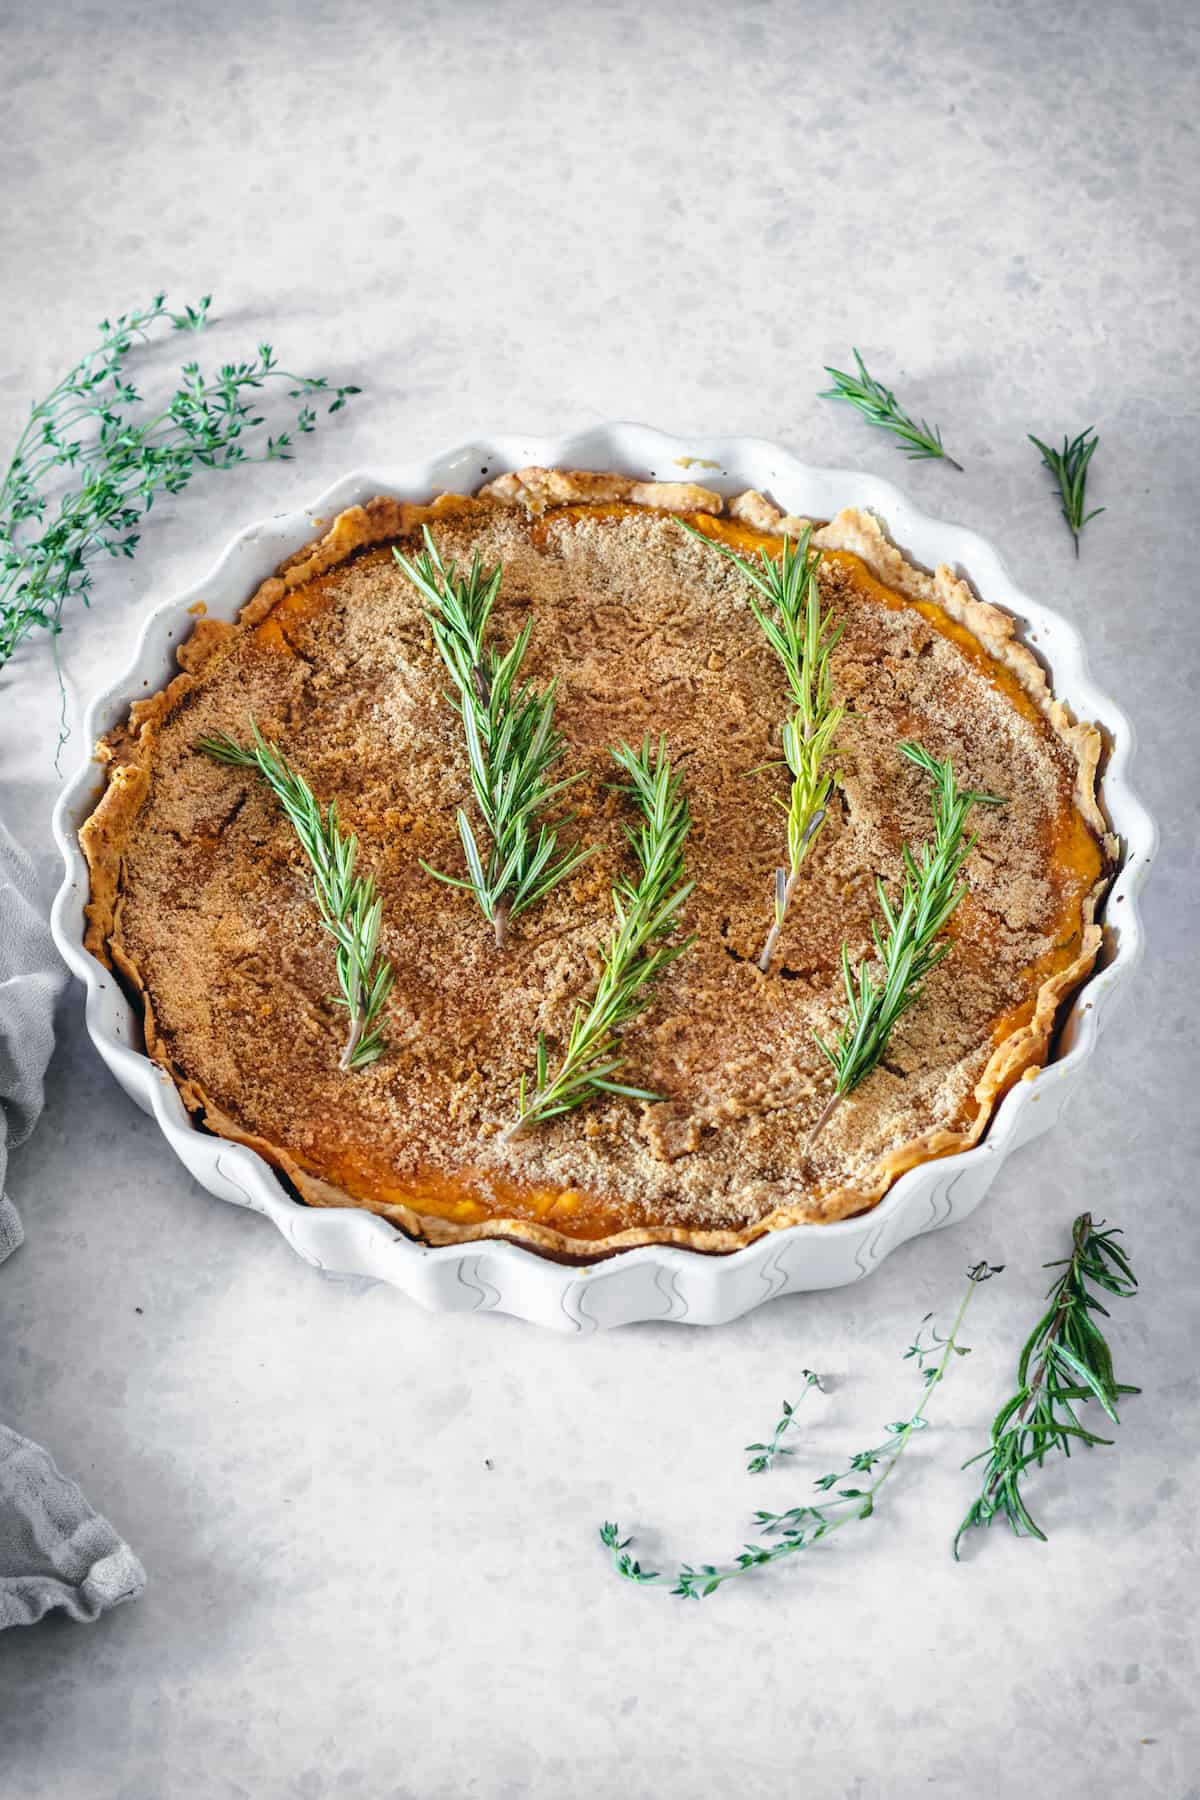 Butternut squash tart with caramelized onions topped with rosemary